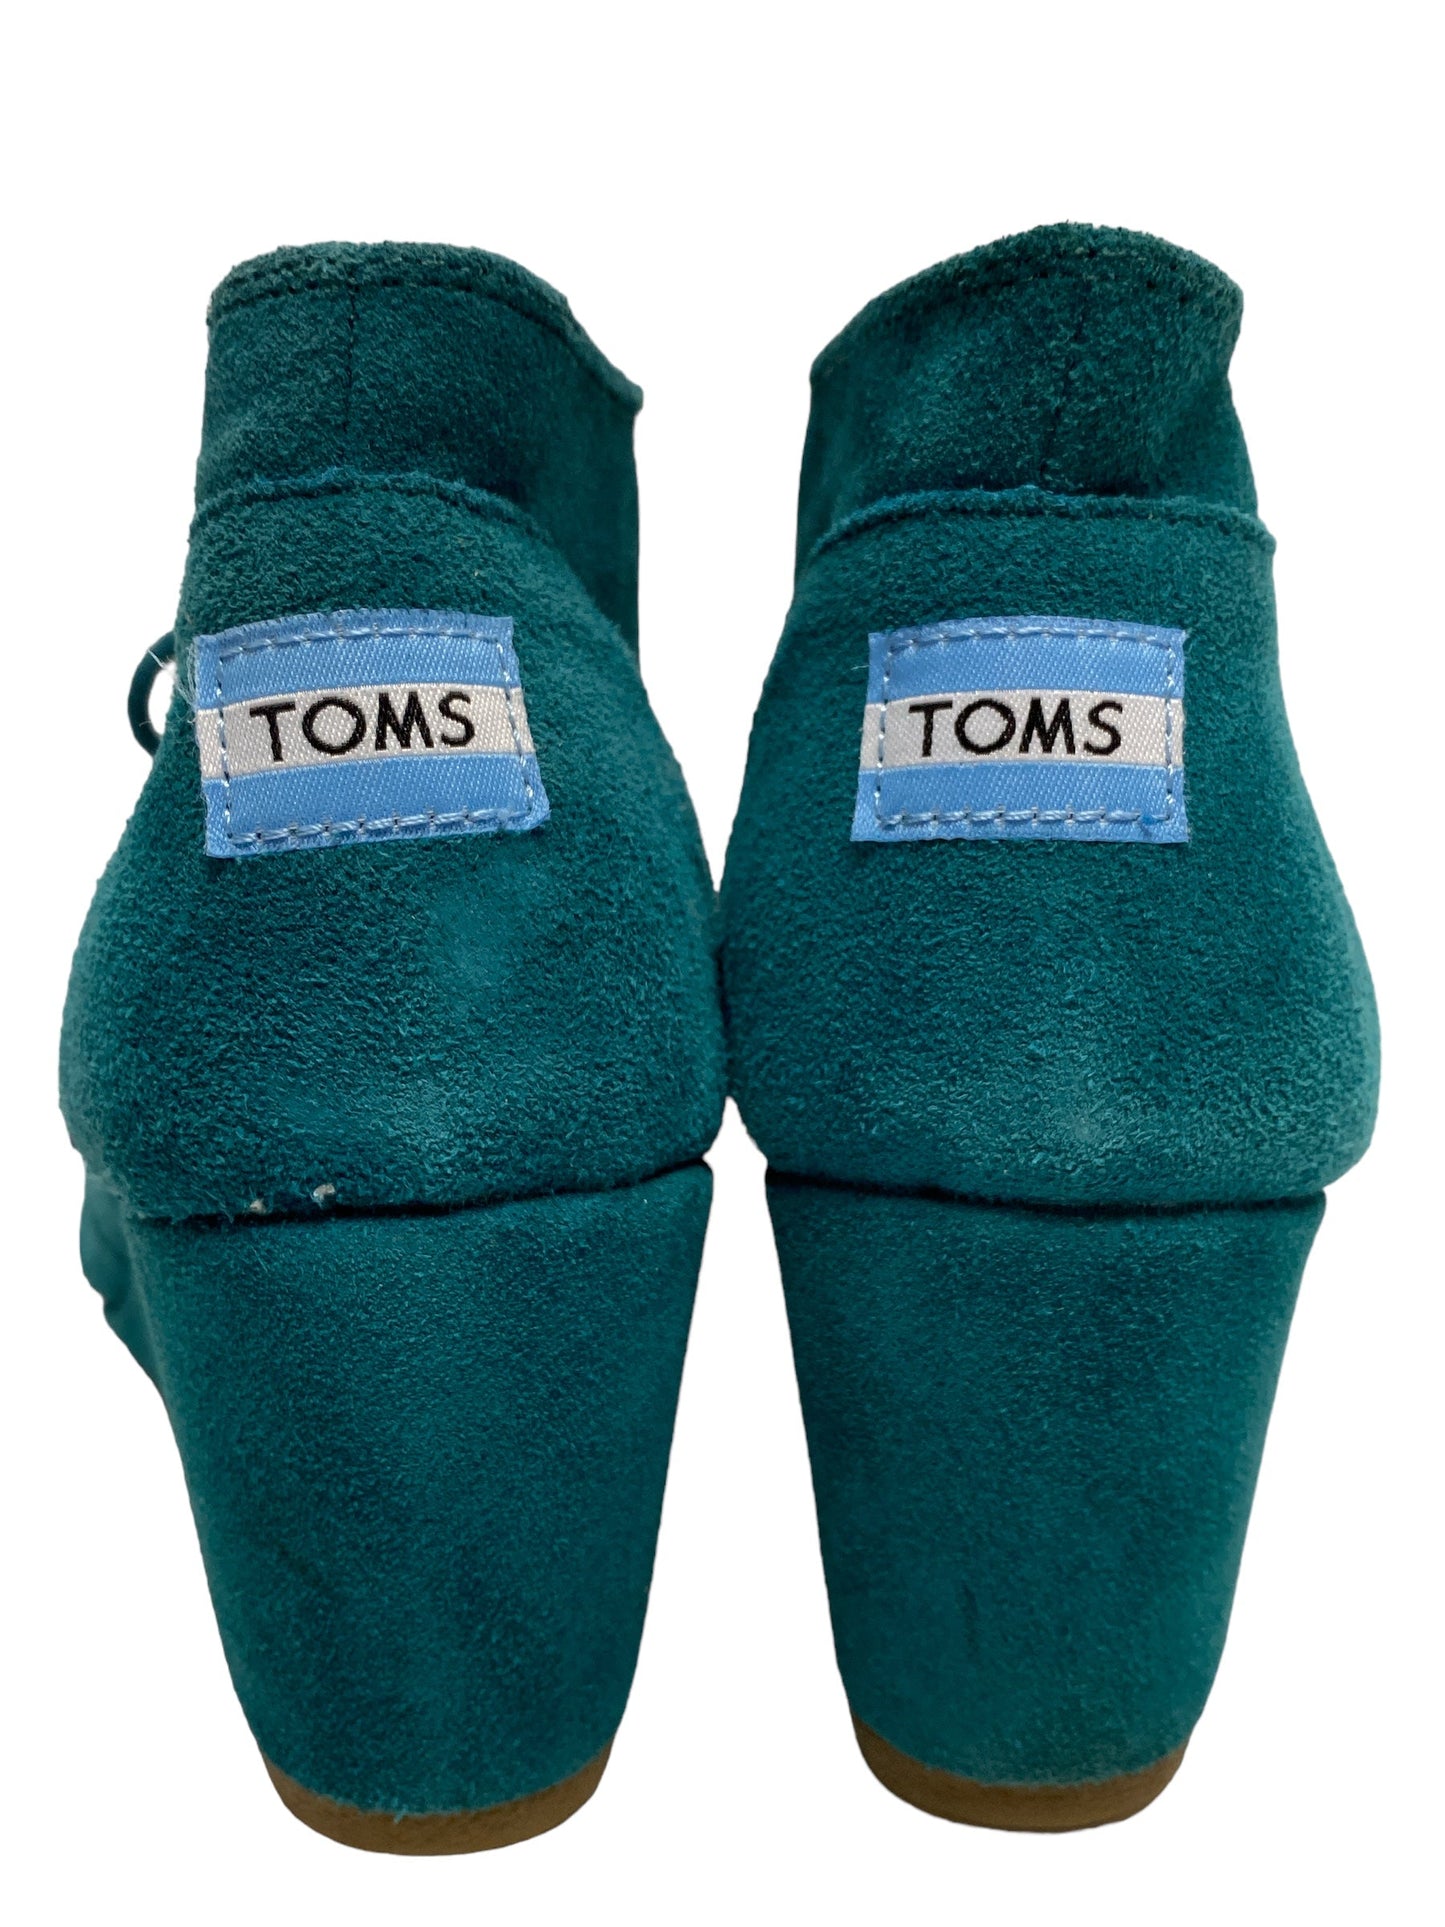 Shoes Heels Wedge By Toms  Size: 9